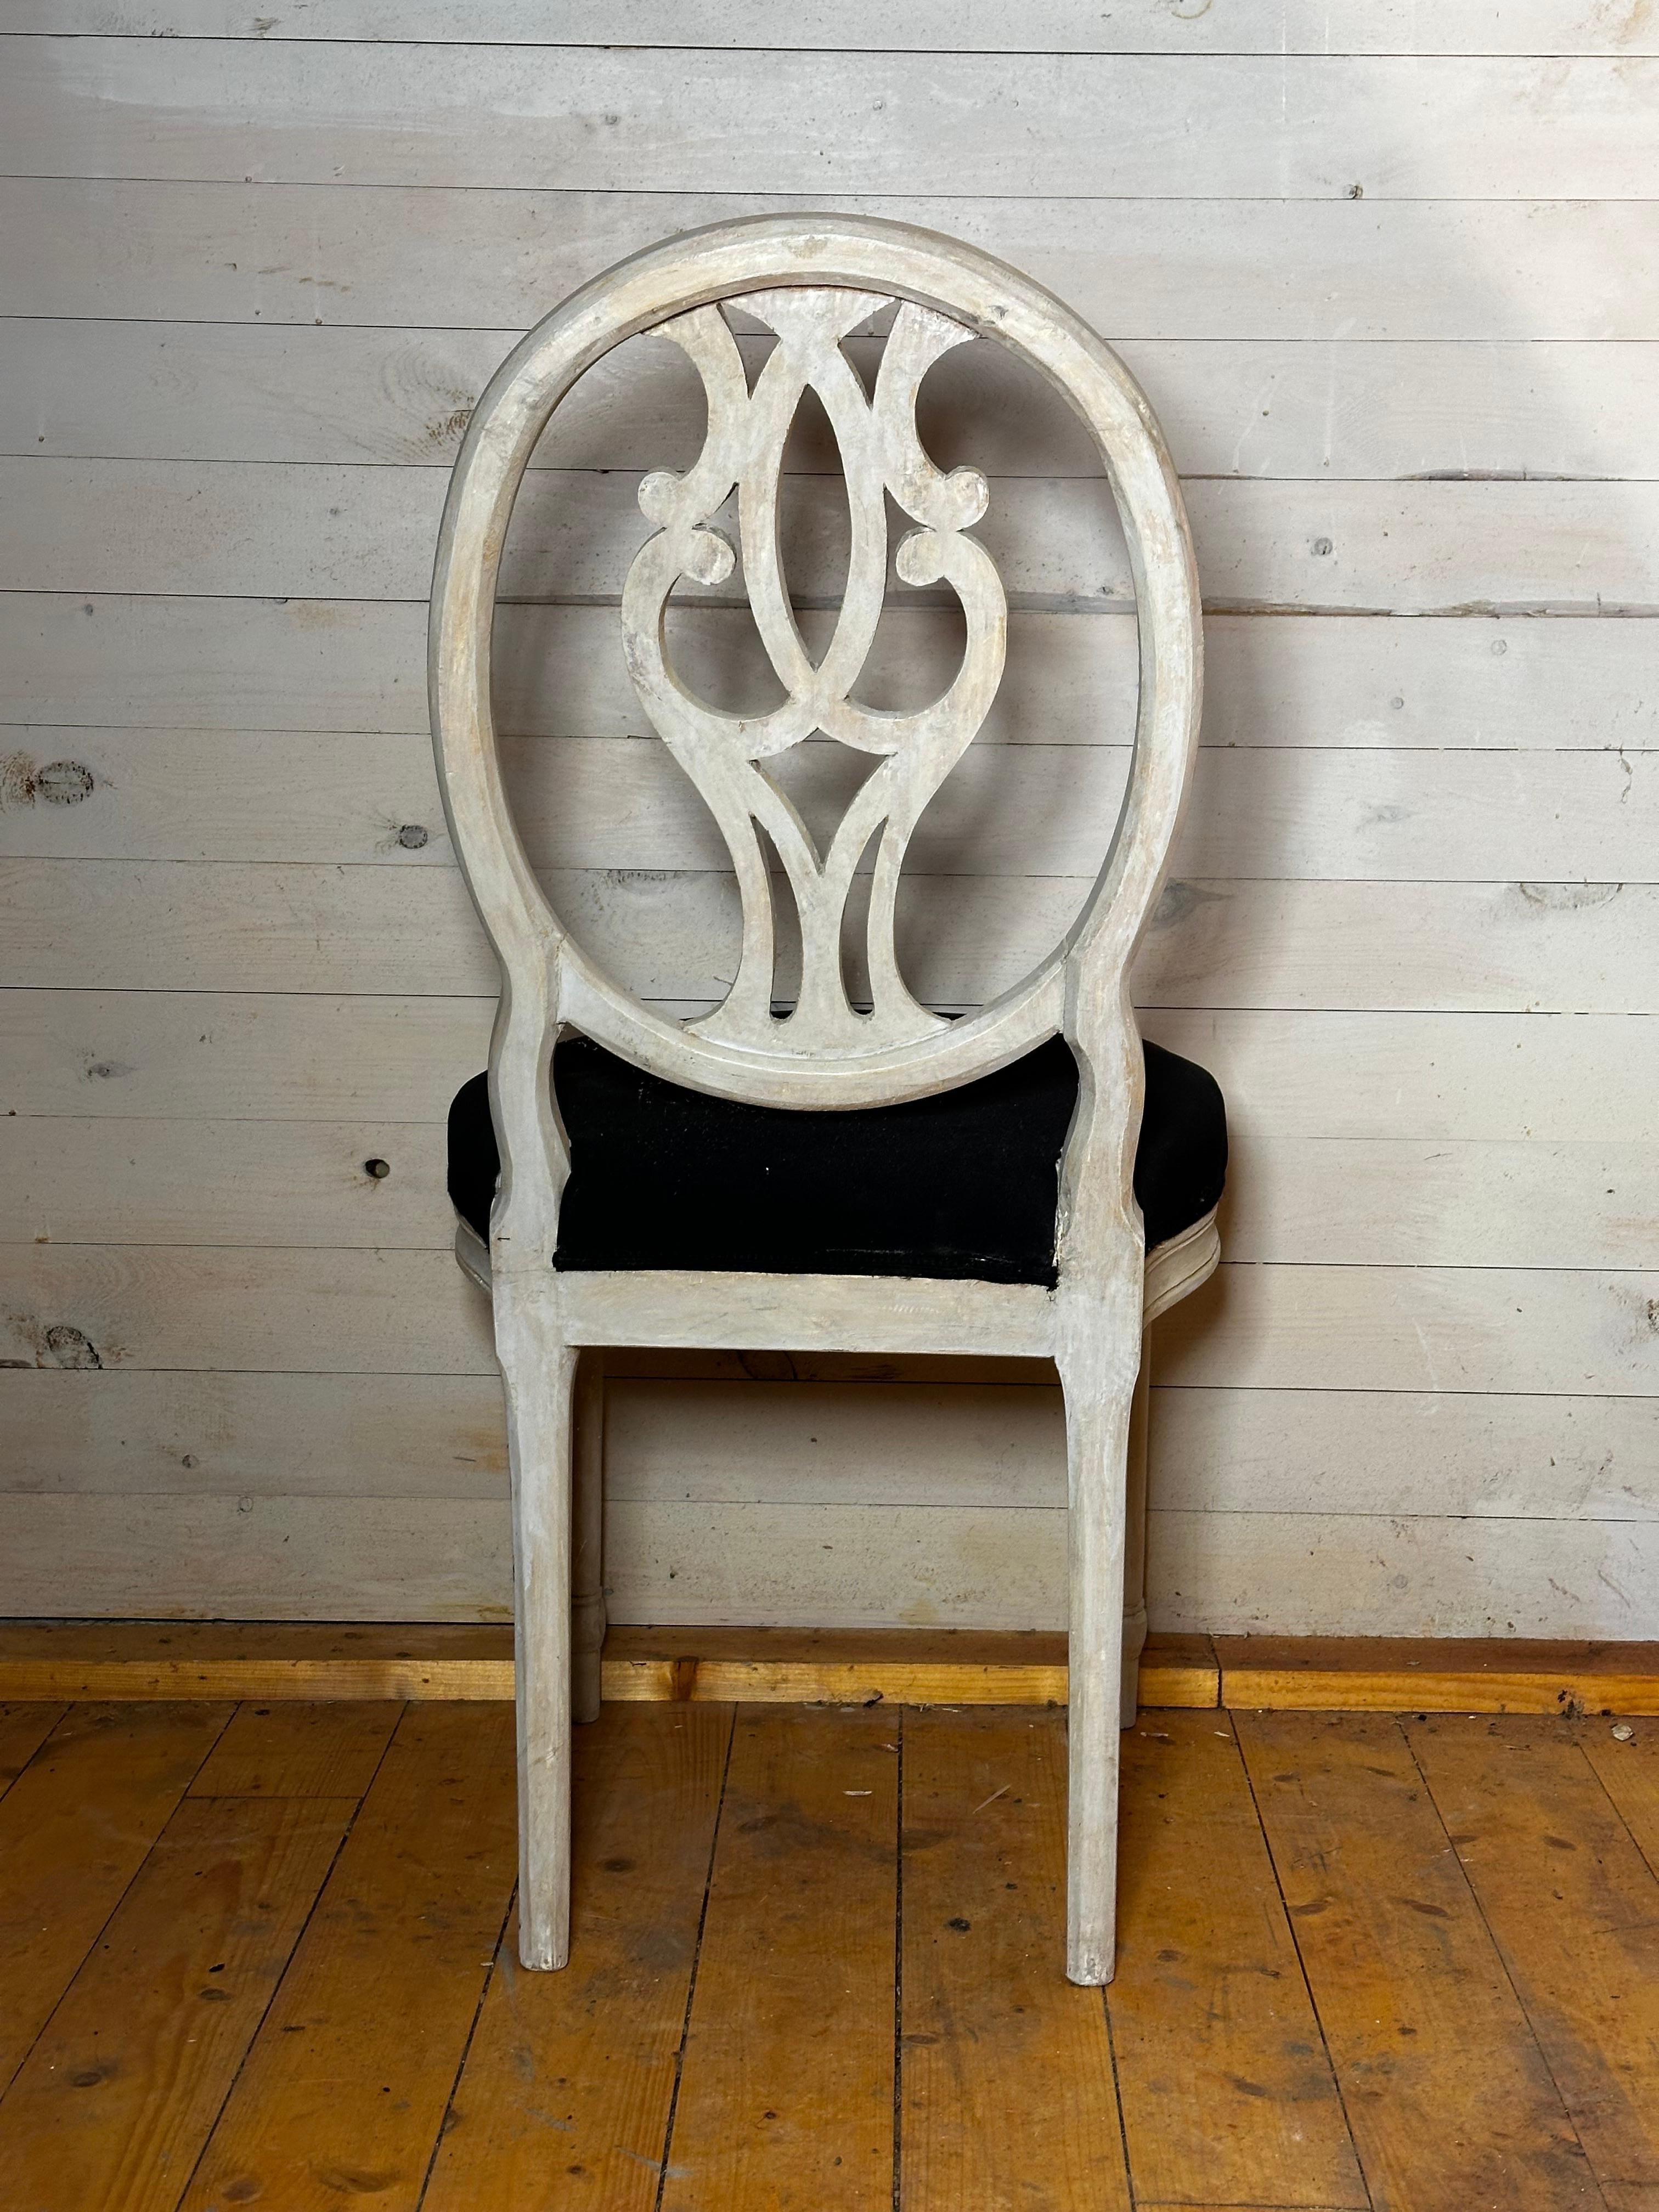 A pair of Swedish chairs about 1840:s. The back is very unusual and could be seen as a double G, referring to King Gustav the Third in Sweden.
There are two pairs.
